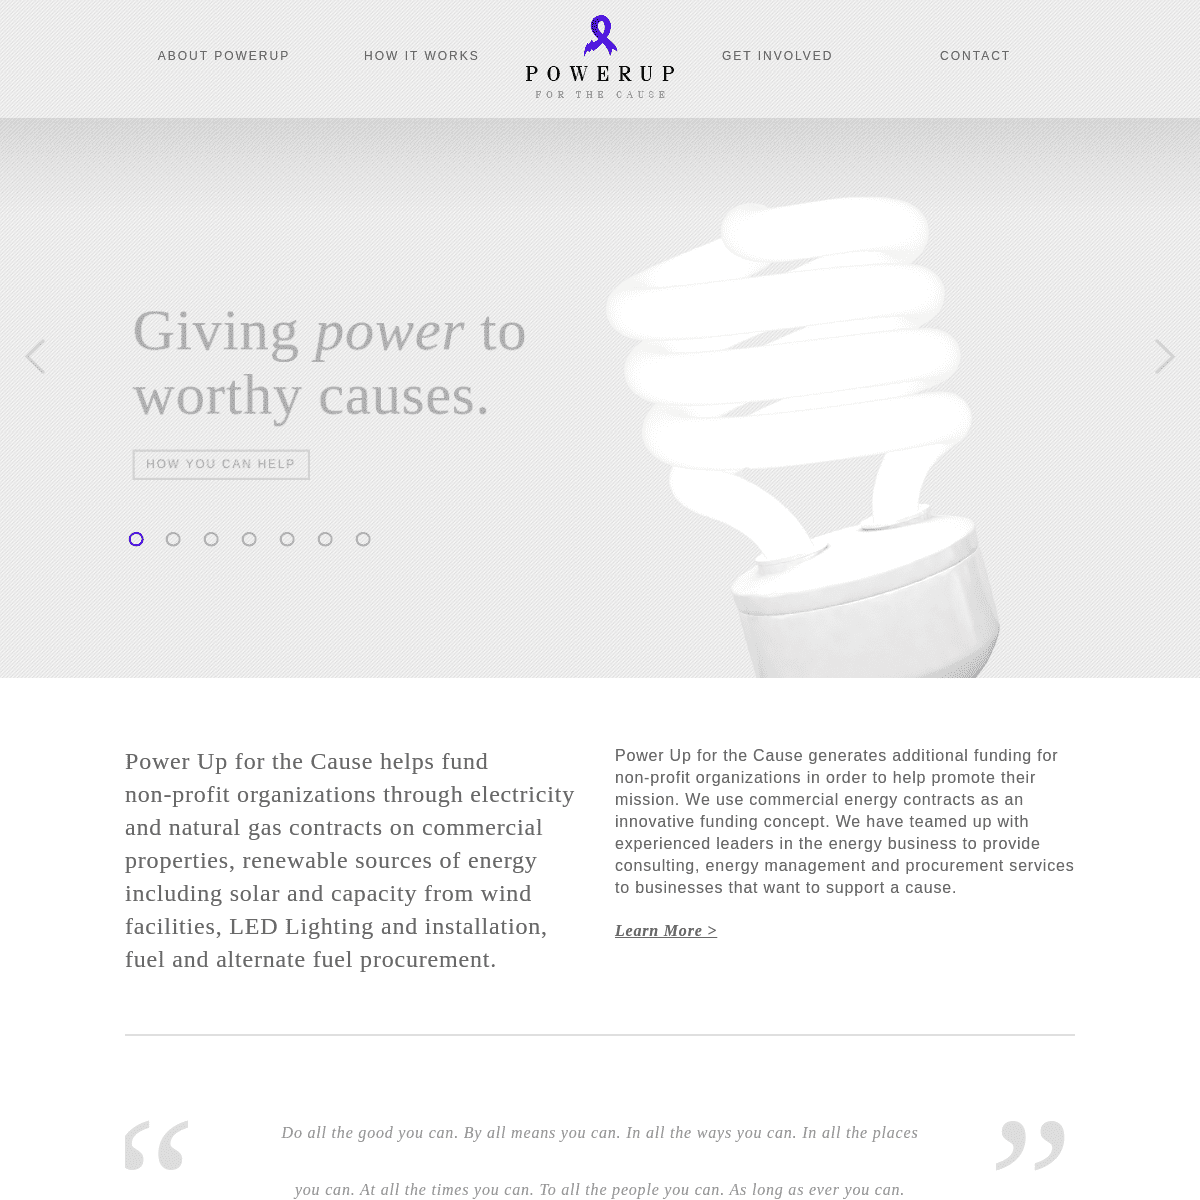 A complete backup of https://powerupforthecause.com